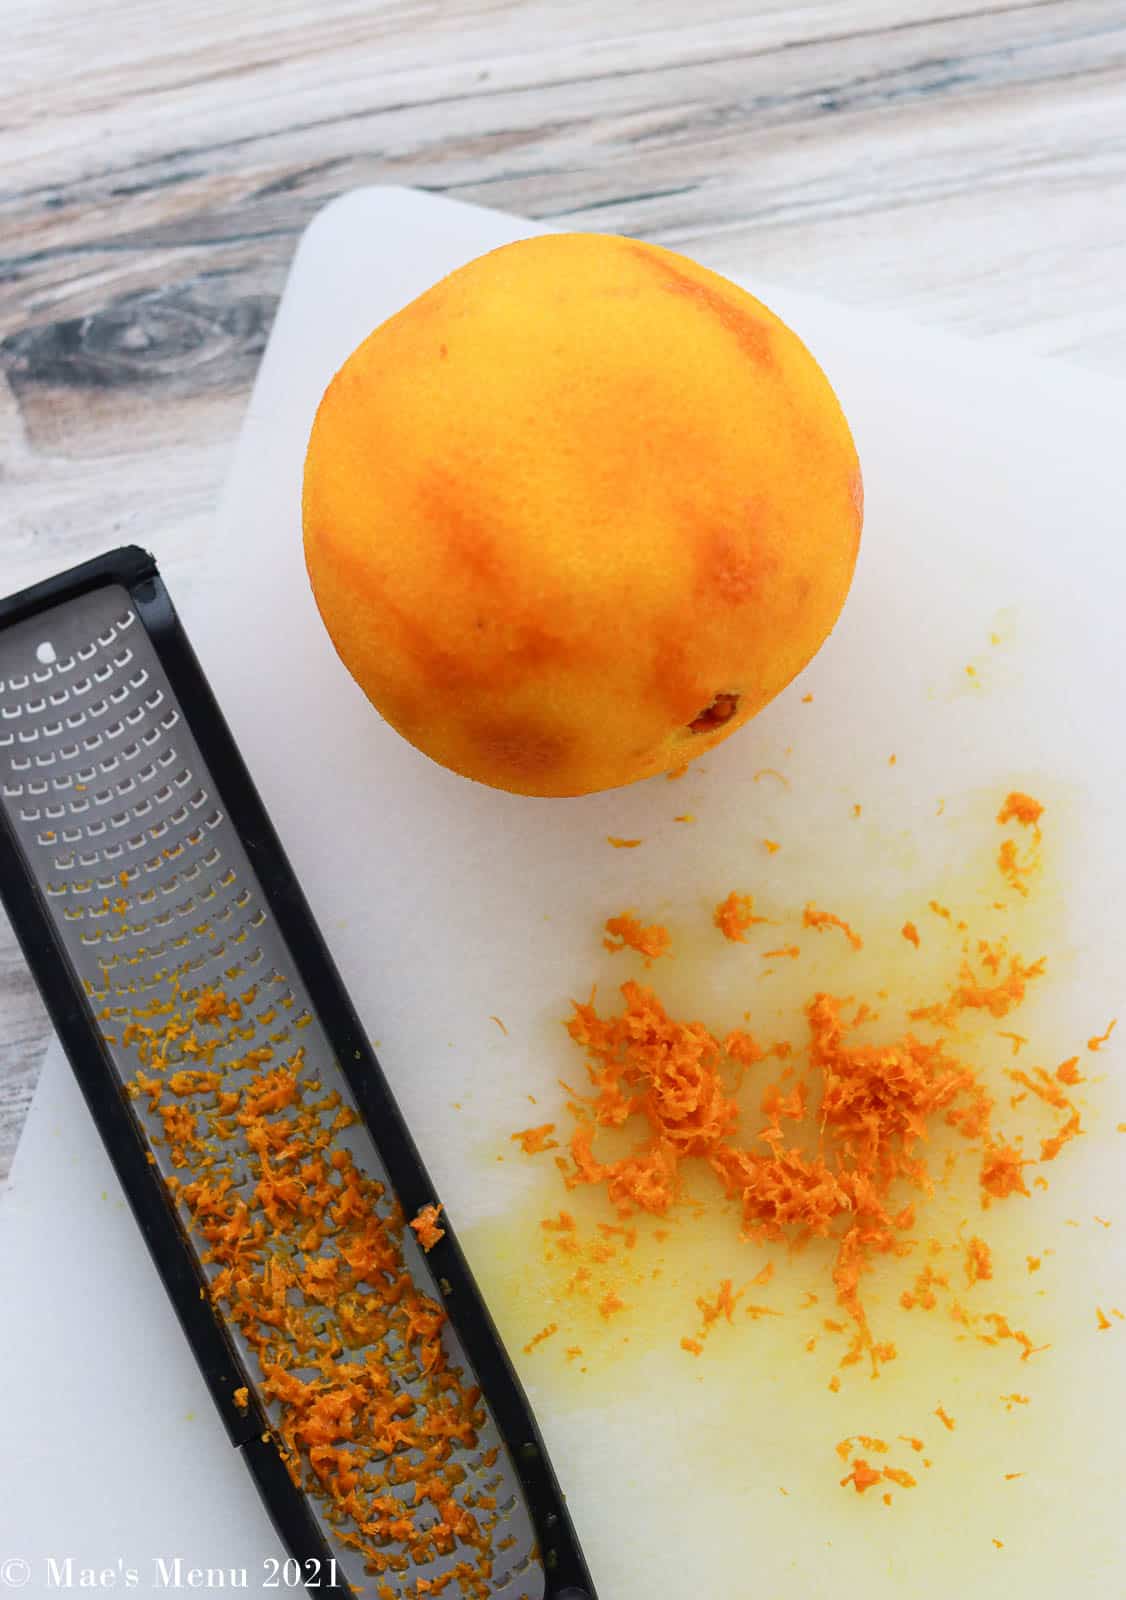 A zested orange with a microplane zester and orange zest on a cutting board